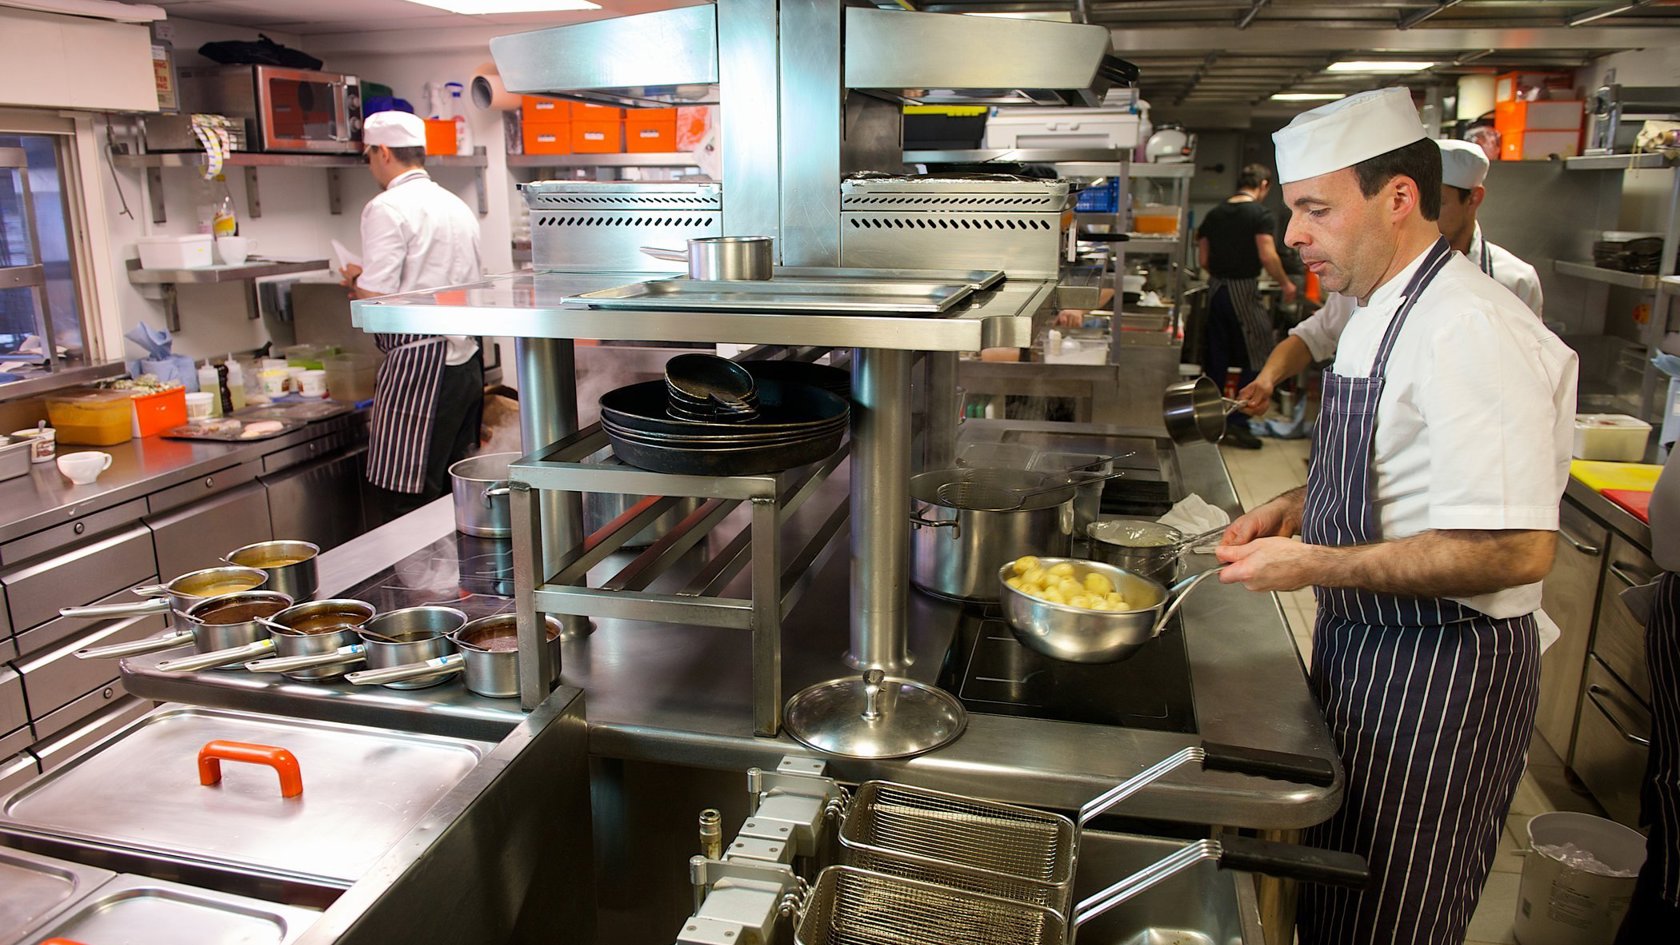 Chefs cooking in a commercial kitchen